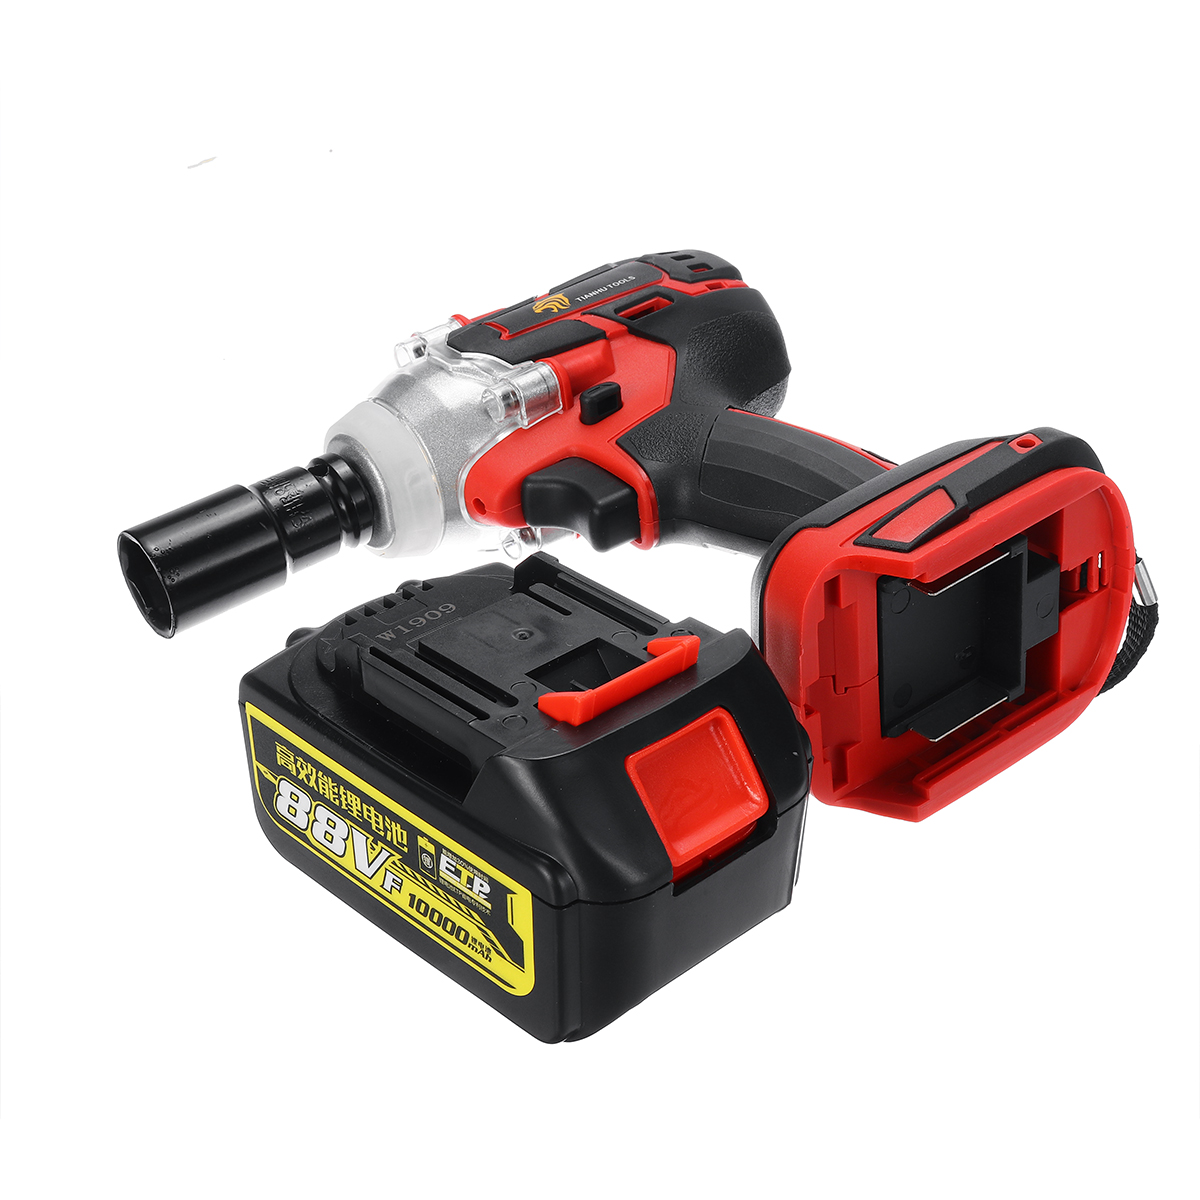 88VF-10000mAh-520NM-High-Torque-Cordless-Brushless-Electric-Wrench-with-Rechargeable-Battery-1782562-7